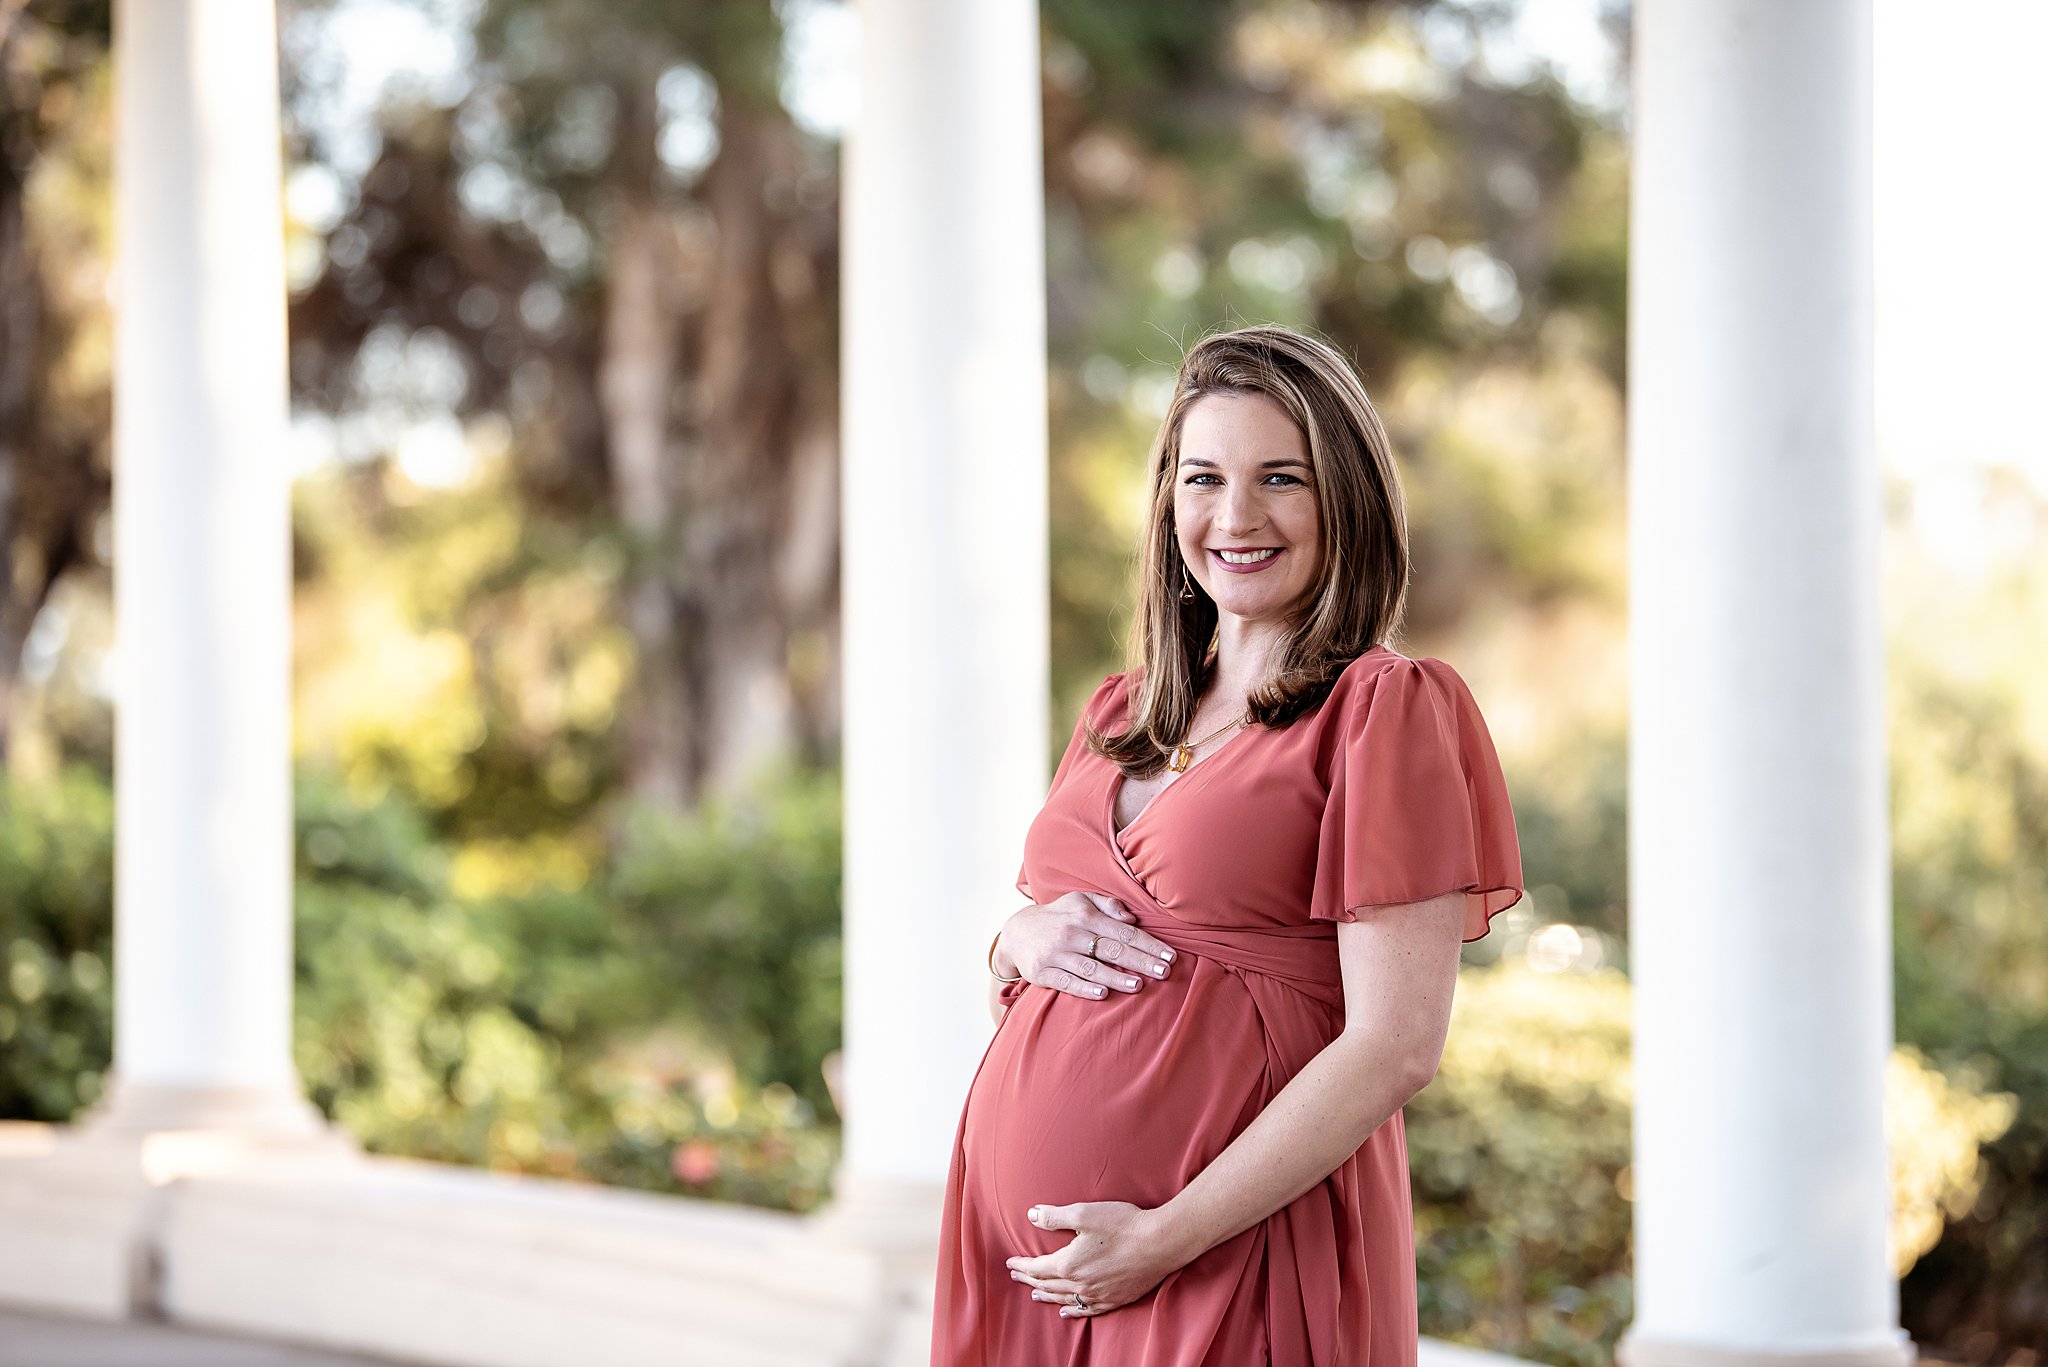 A mom to be stands in front of some pillars in a park while holding her bump Tourmaline Birth Center